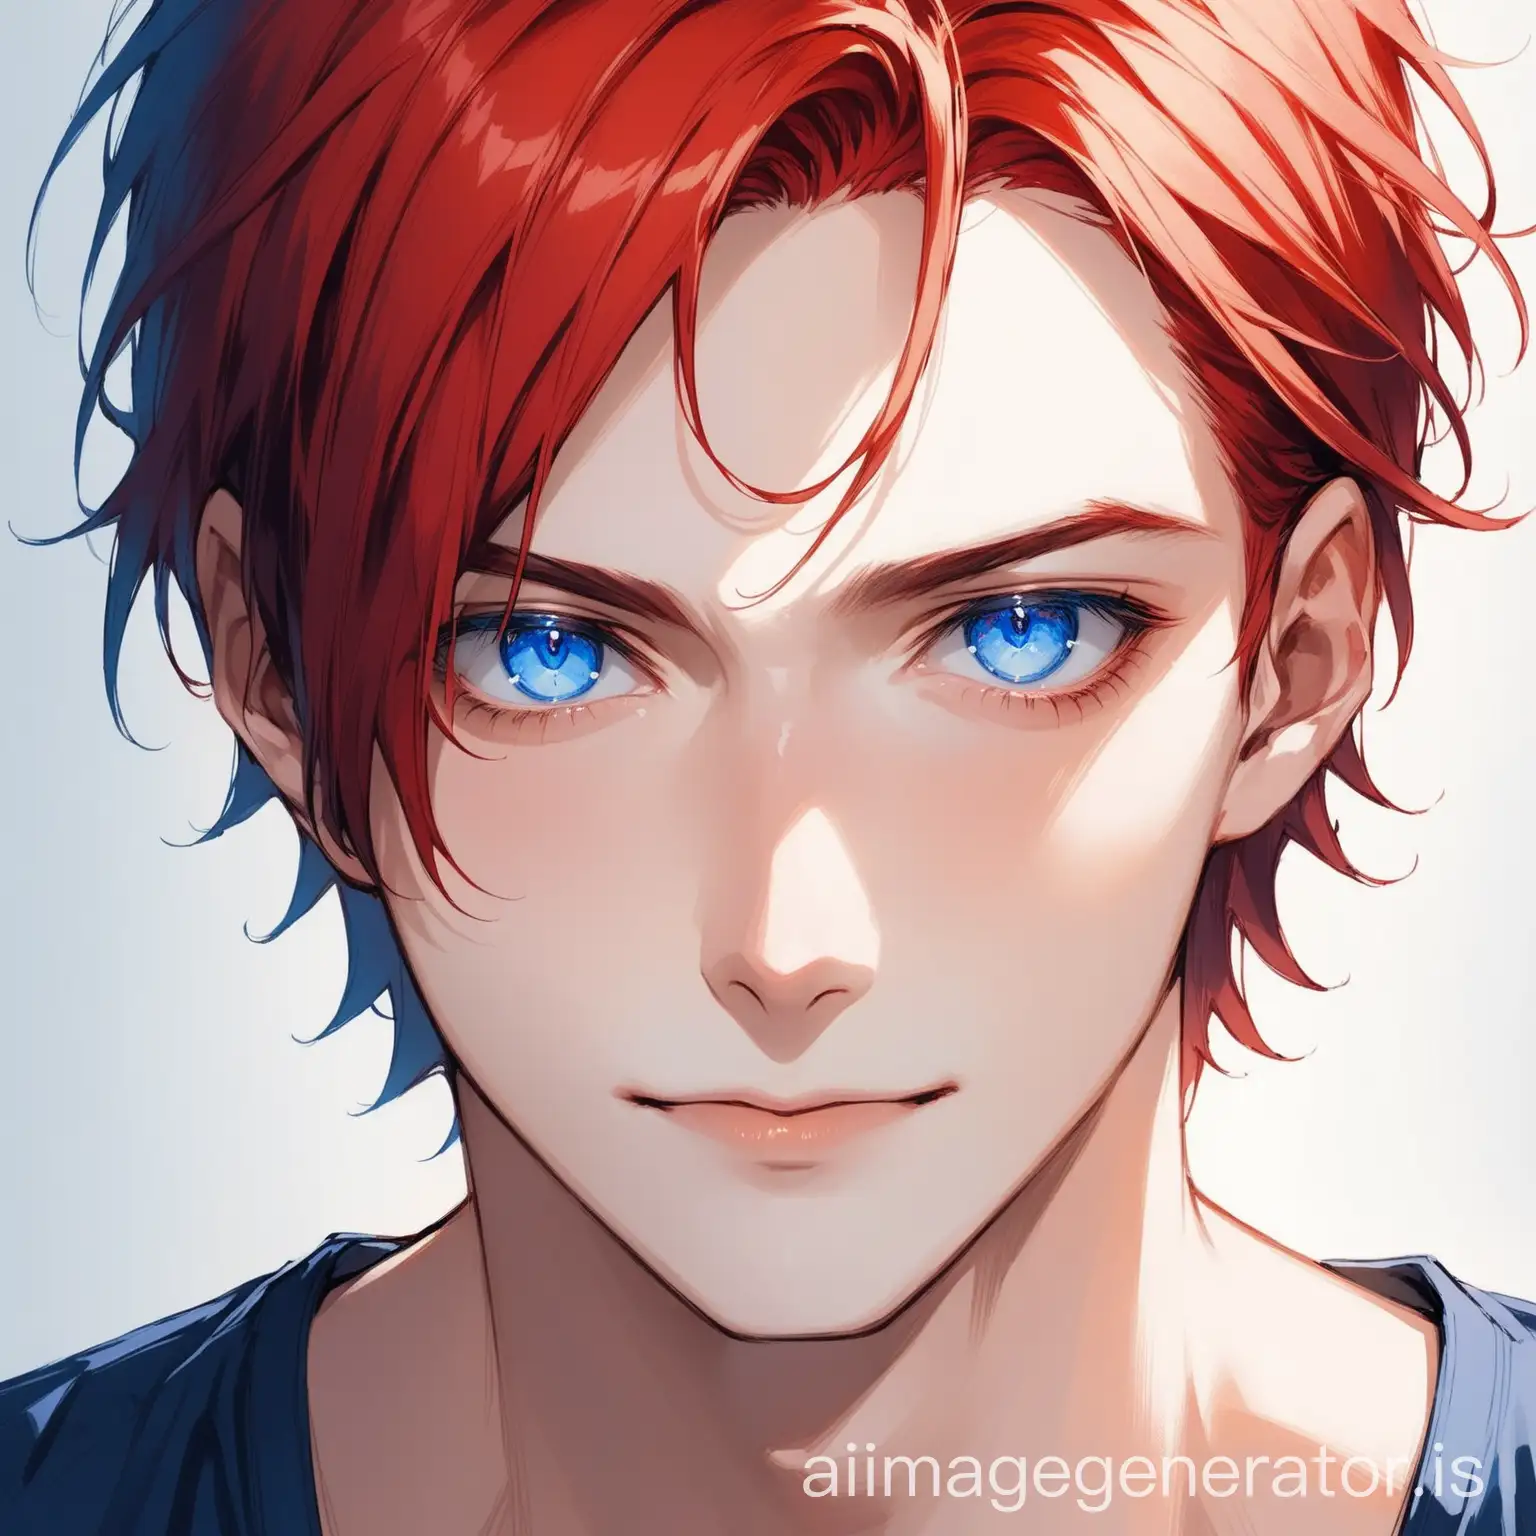 portrait of a man with fair skin and red hair with blue indigo eyes and an innocent appearance